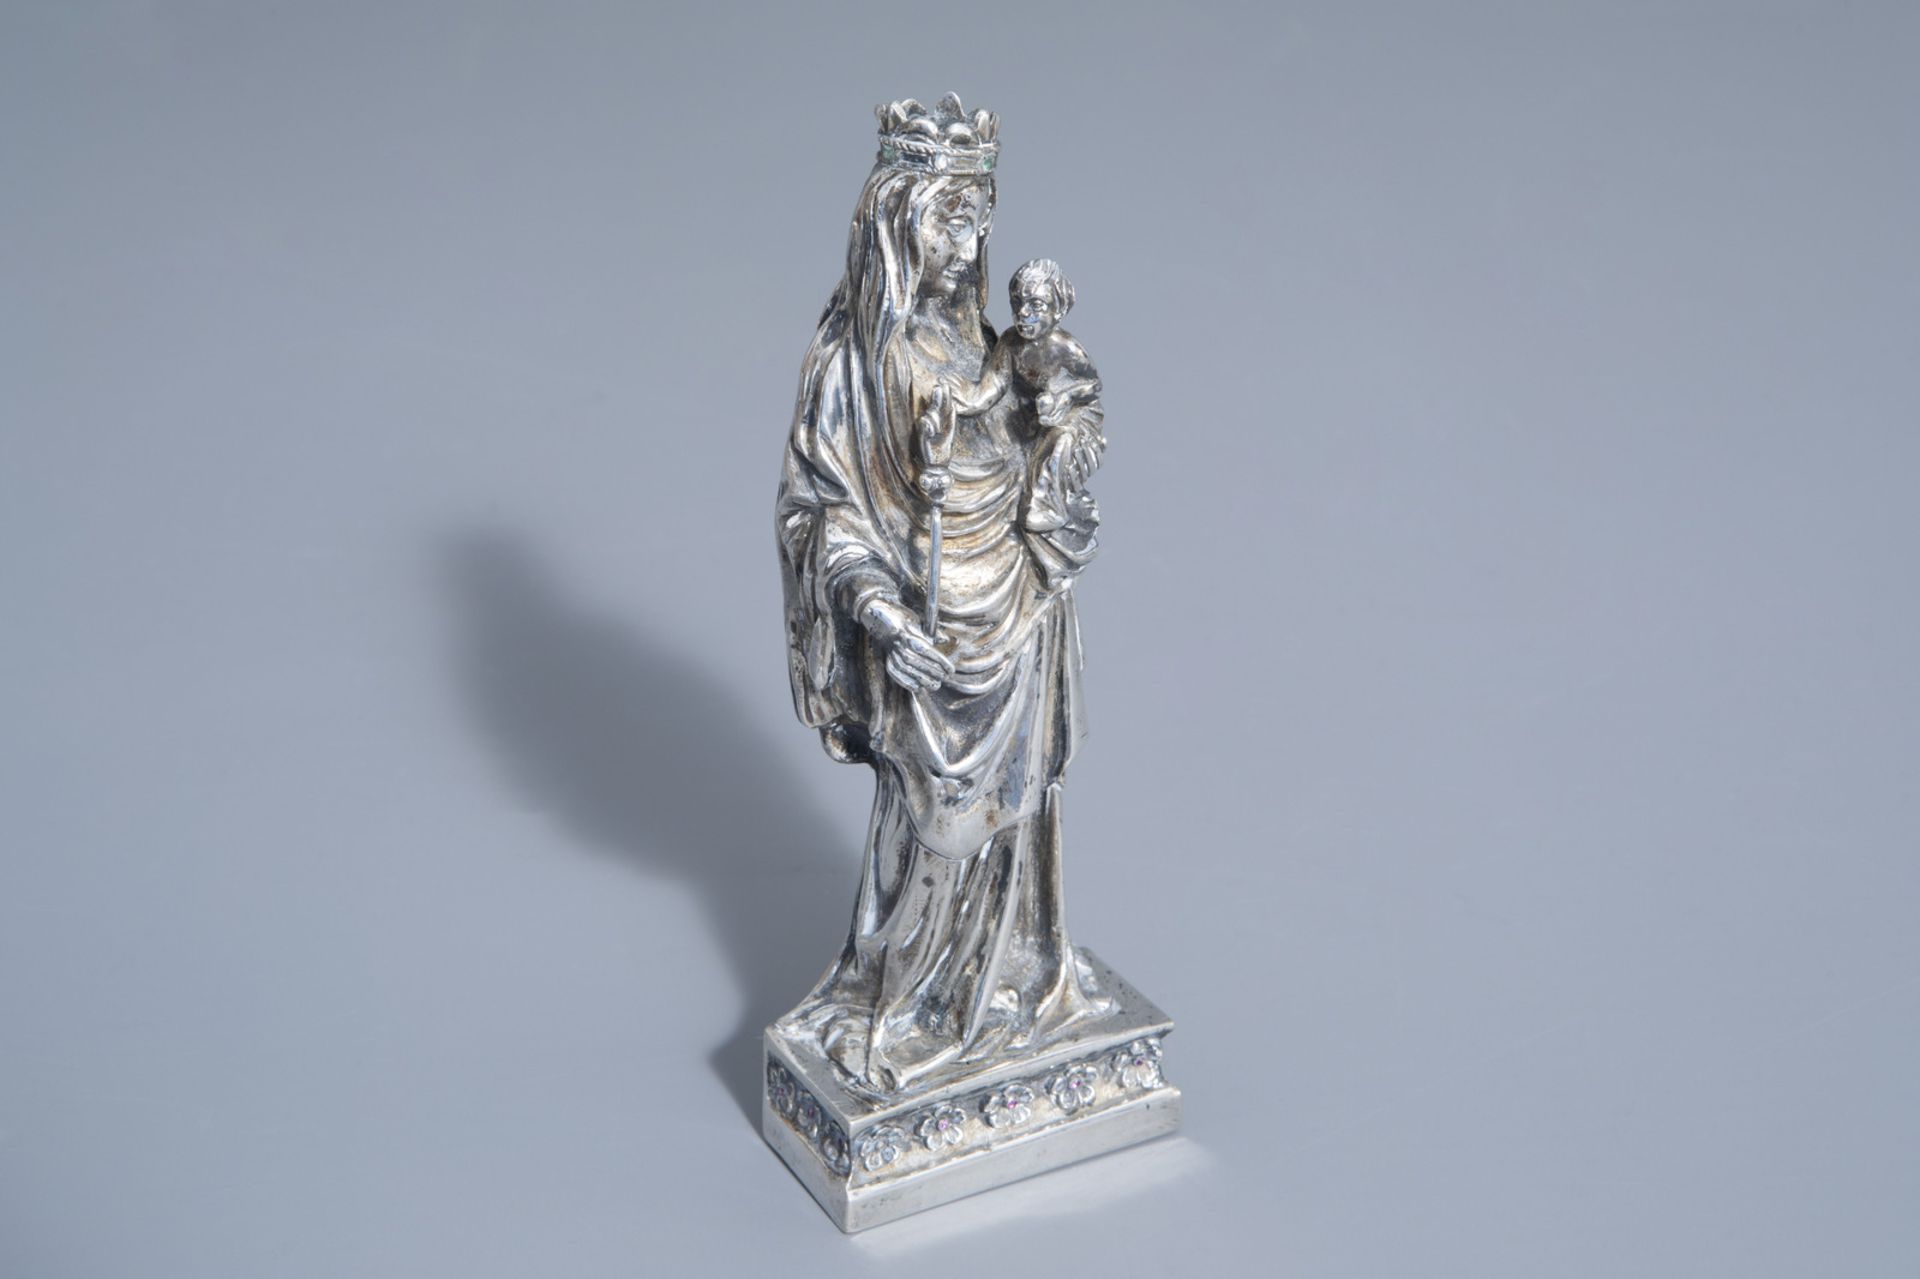 A silver Our Lady and Child after a medieval example, 13 loth, probably Central or Eastern Europe, 1